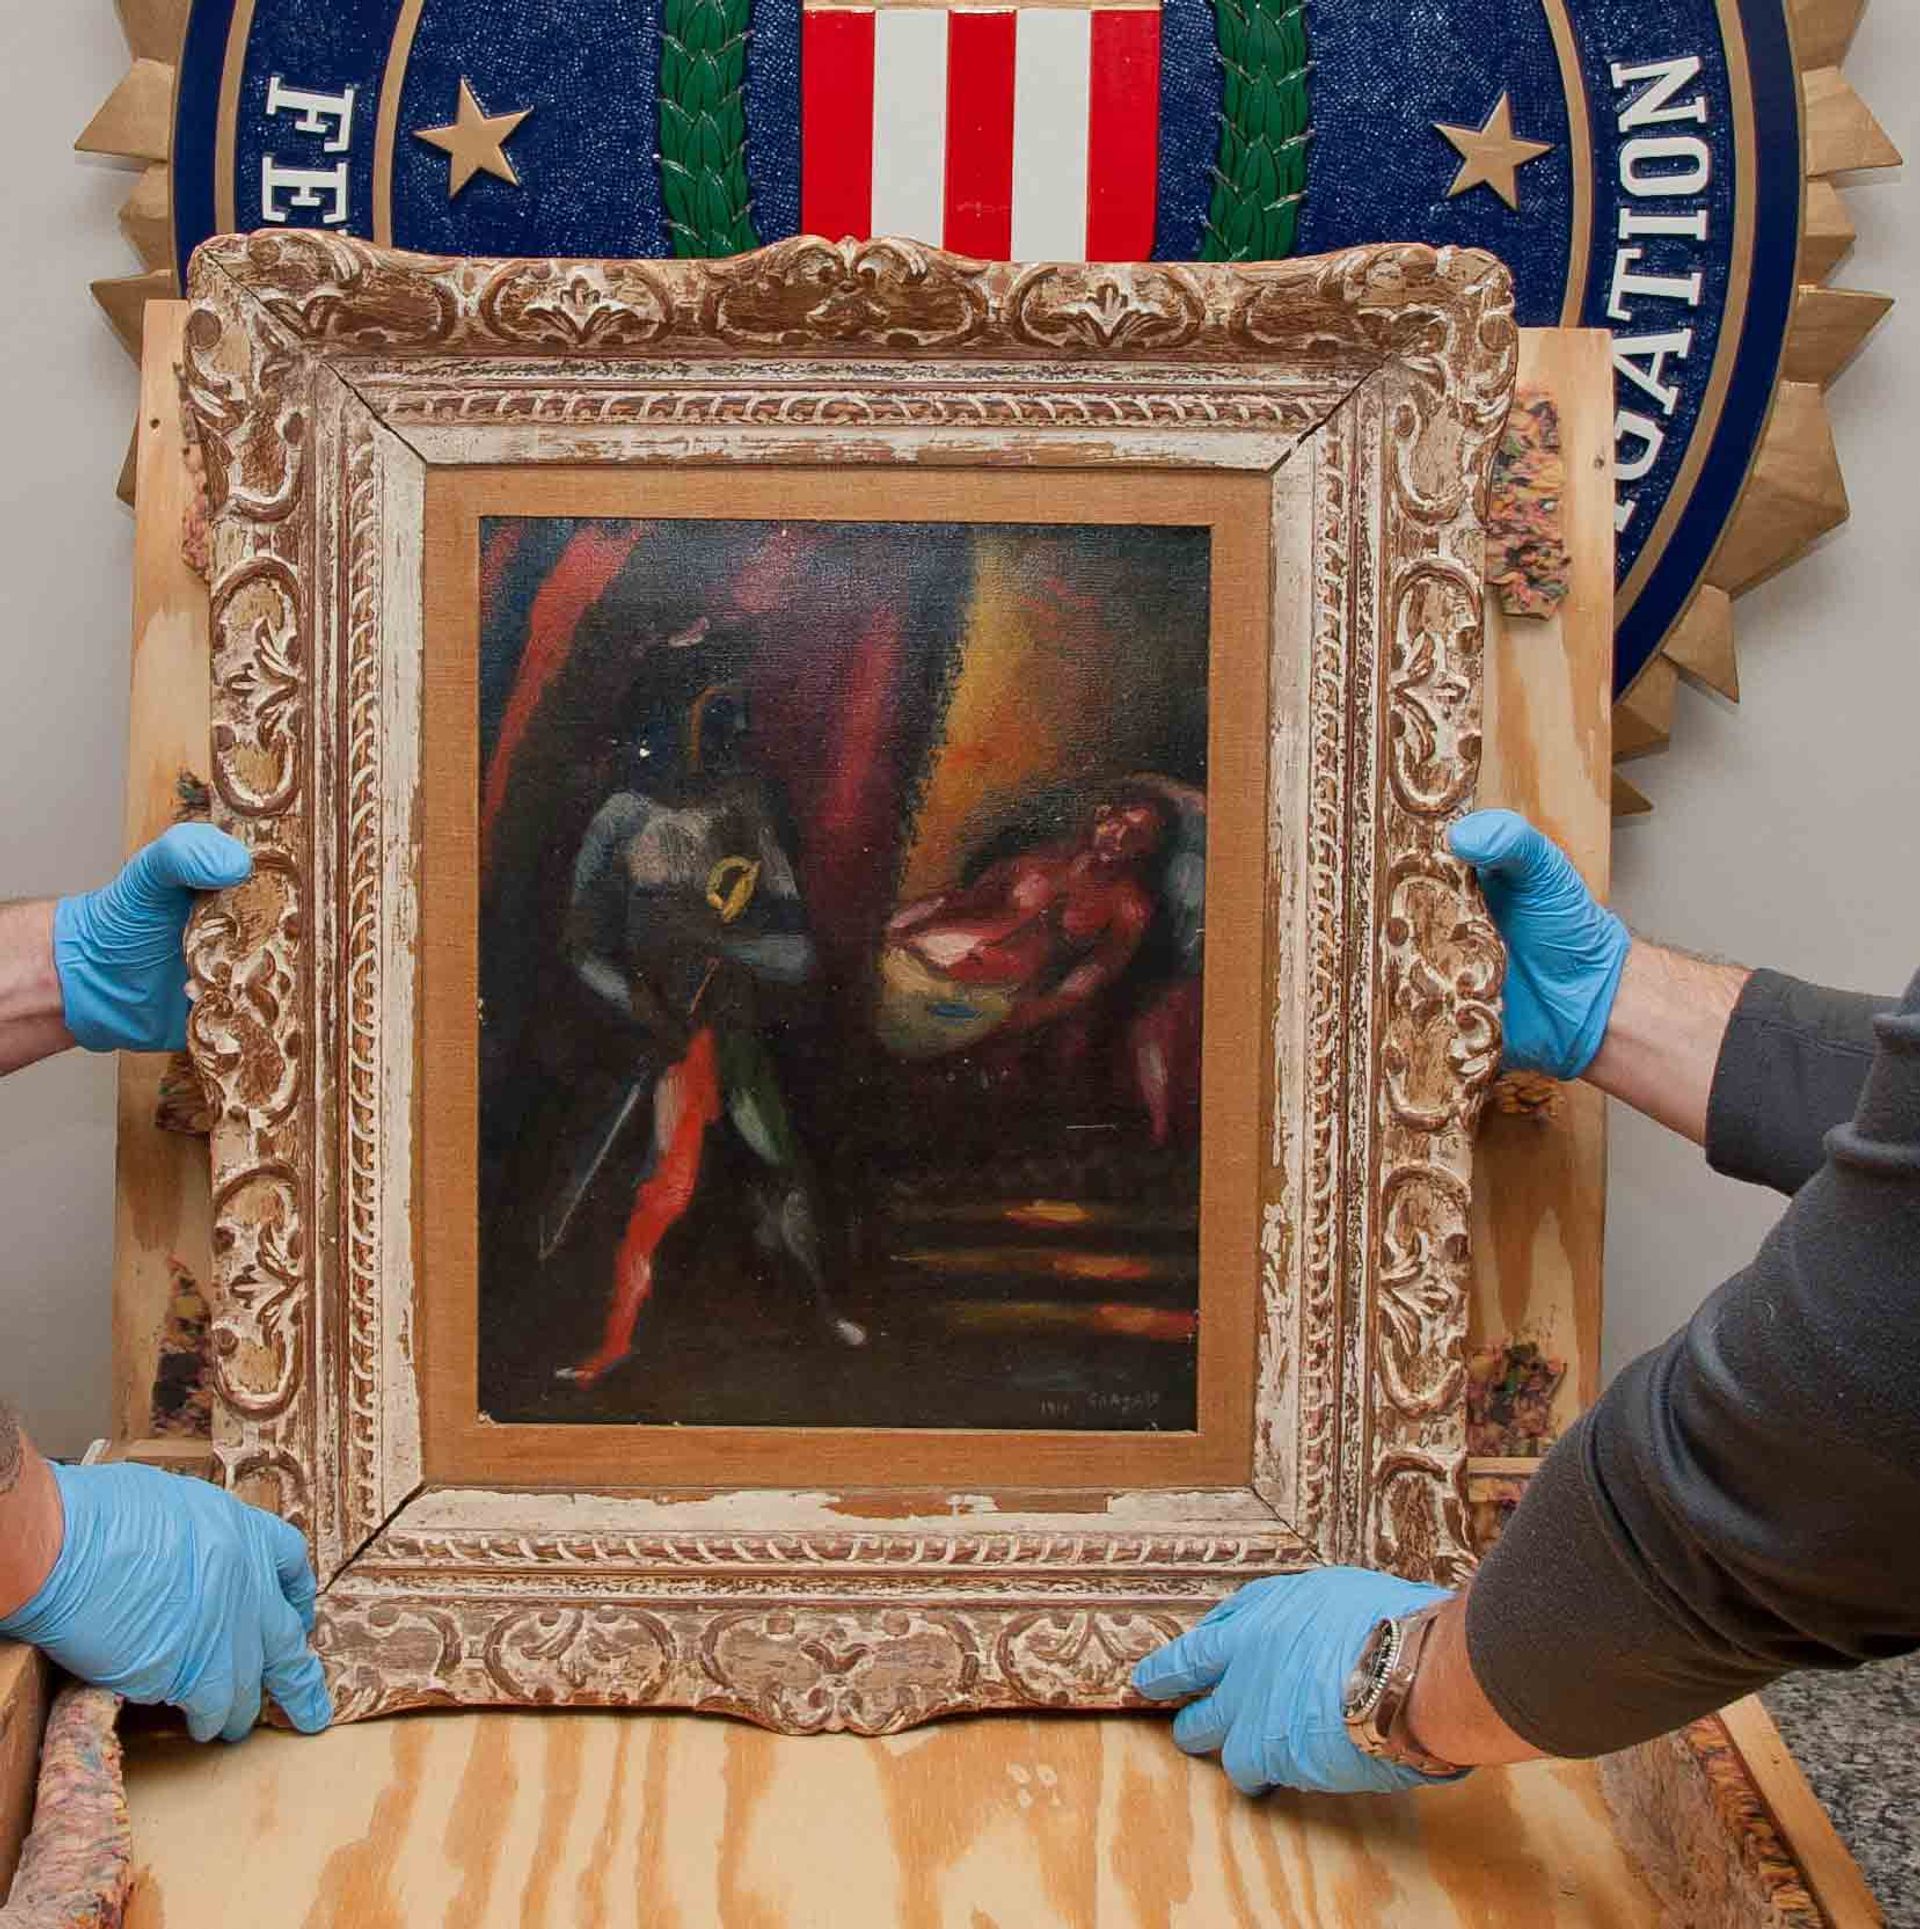 Members of the FBI's Art Crime Team holding a recovered work by Marc Chagall, Othello and Desdemona (1911) FBI